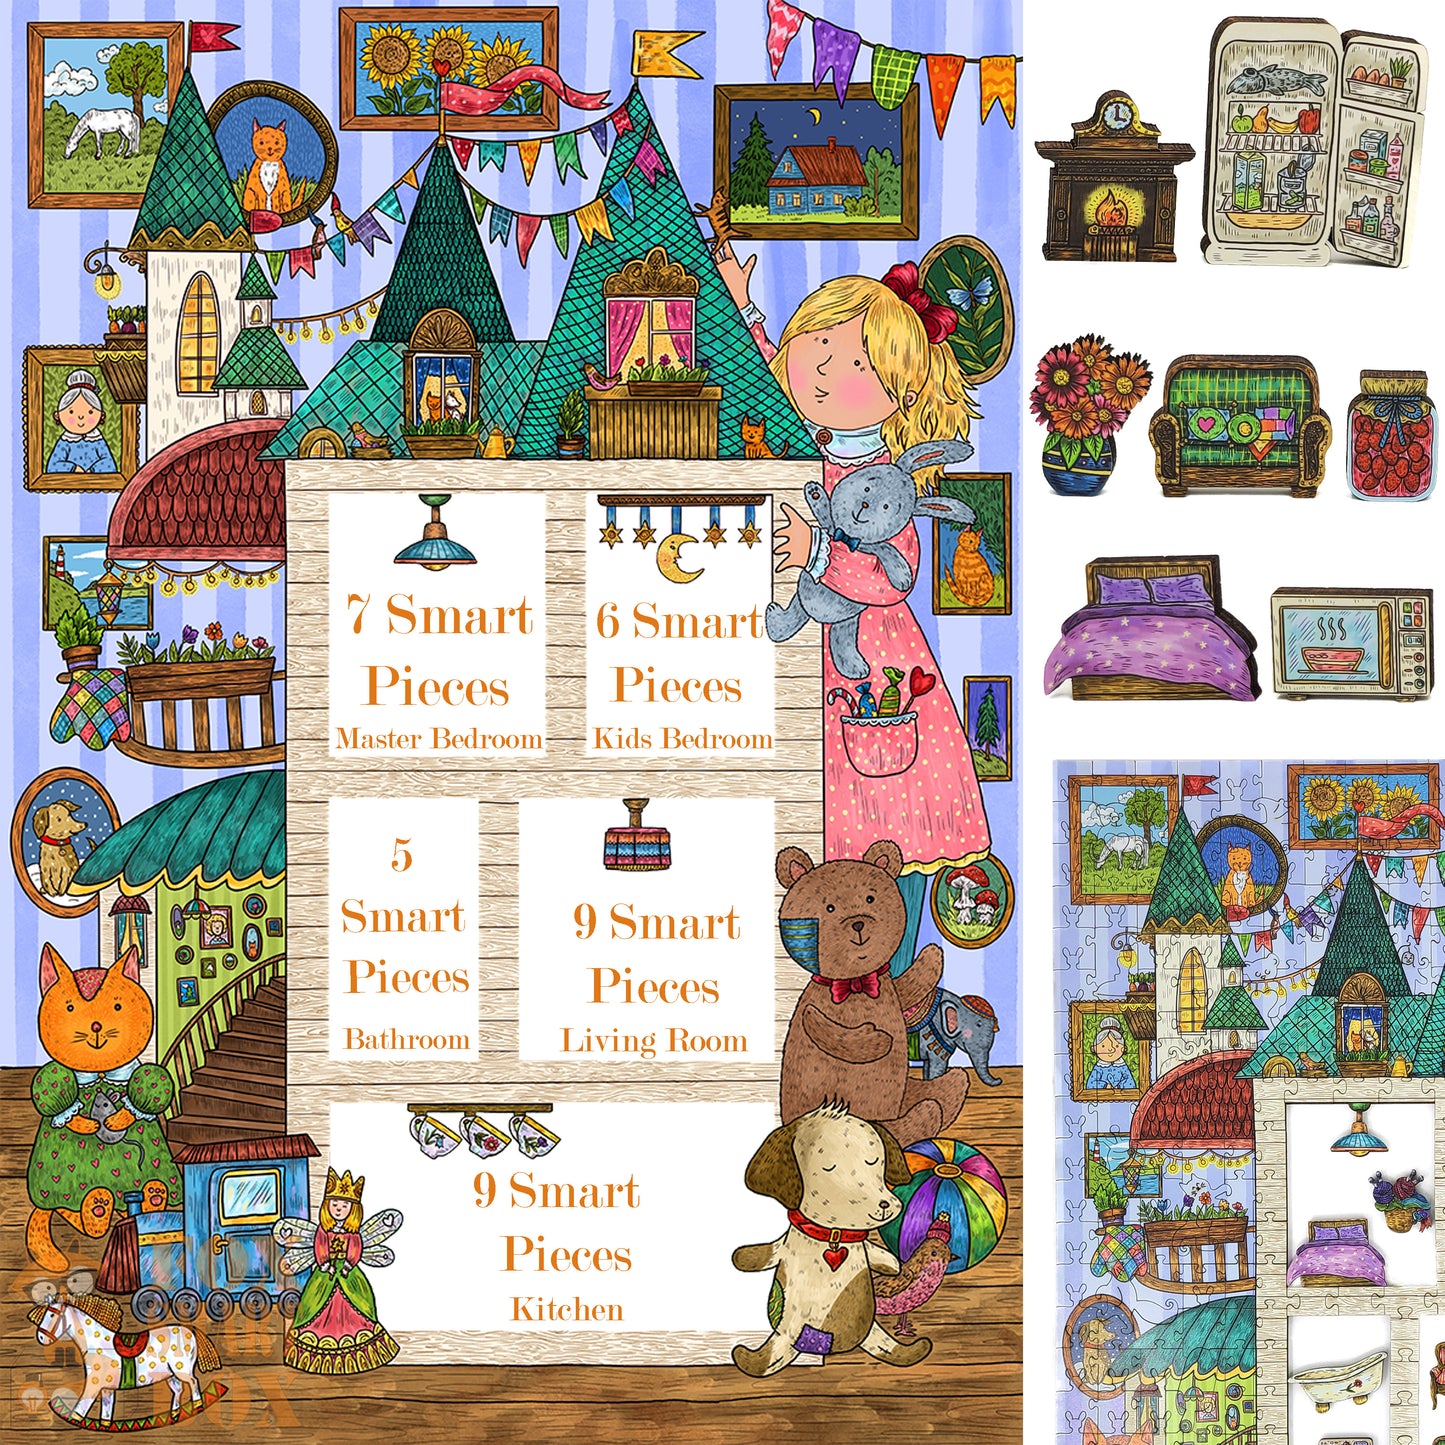 Wooden Jigsaw Puzzle for Adults - Smart Puzzle with Smart Pieces - 330 Puzzle Pieces + 36 Smart Pieces - Amusing House